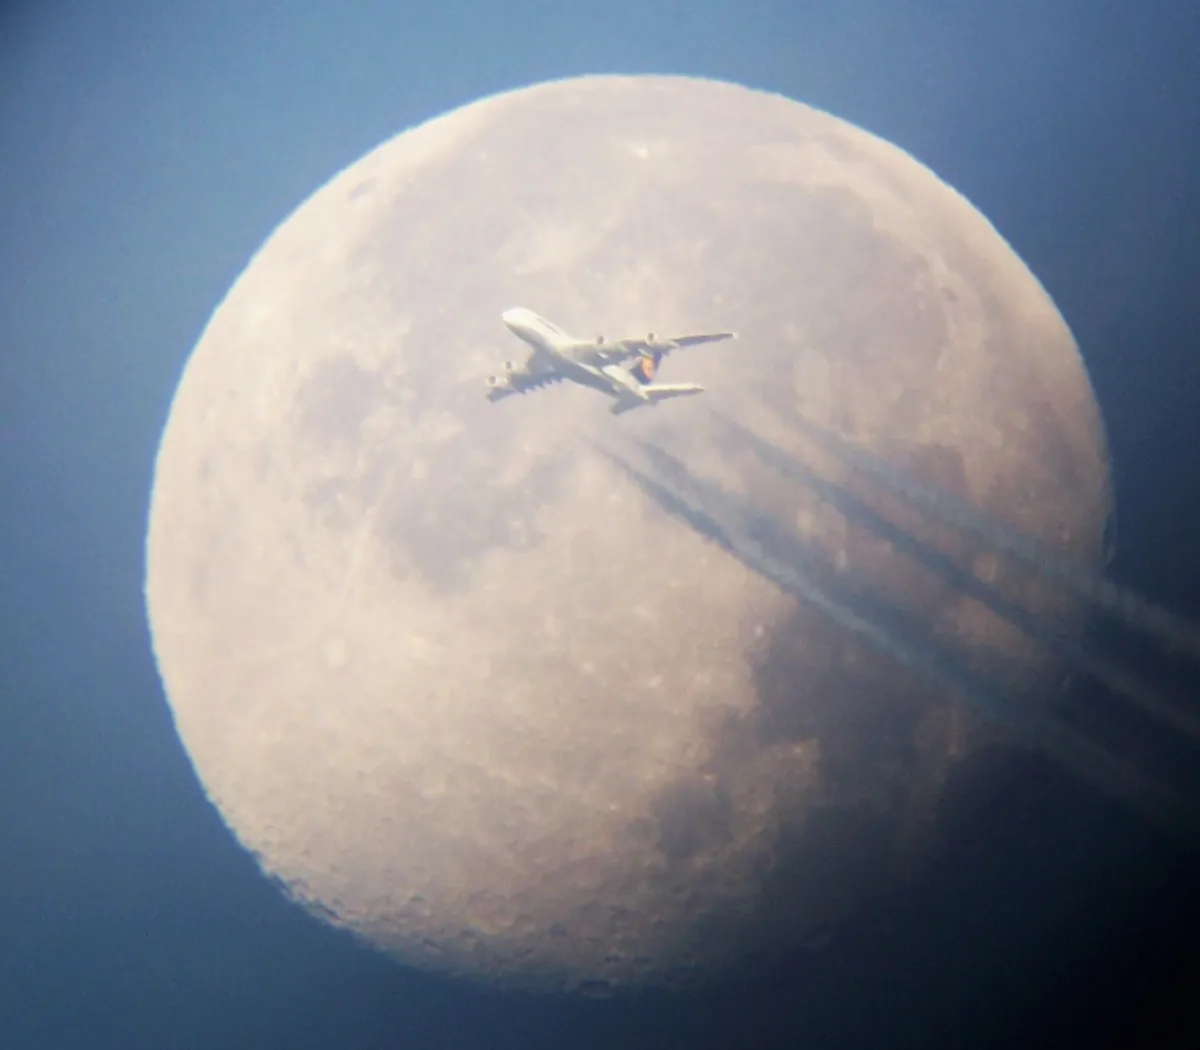 Fly Me to the moon! by Darren Briscoe, Wakefield, W. Yorkshire, UK. Equipment: Skywatcher Skyliner 8